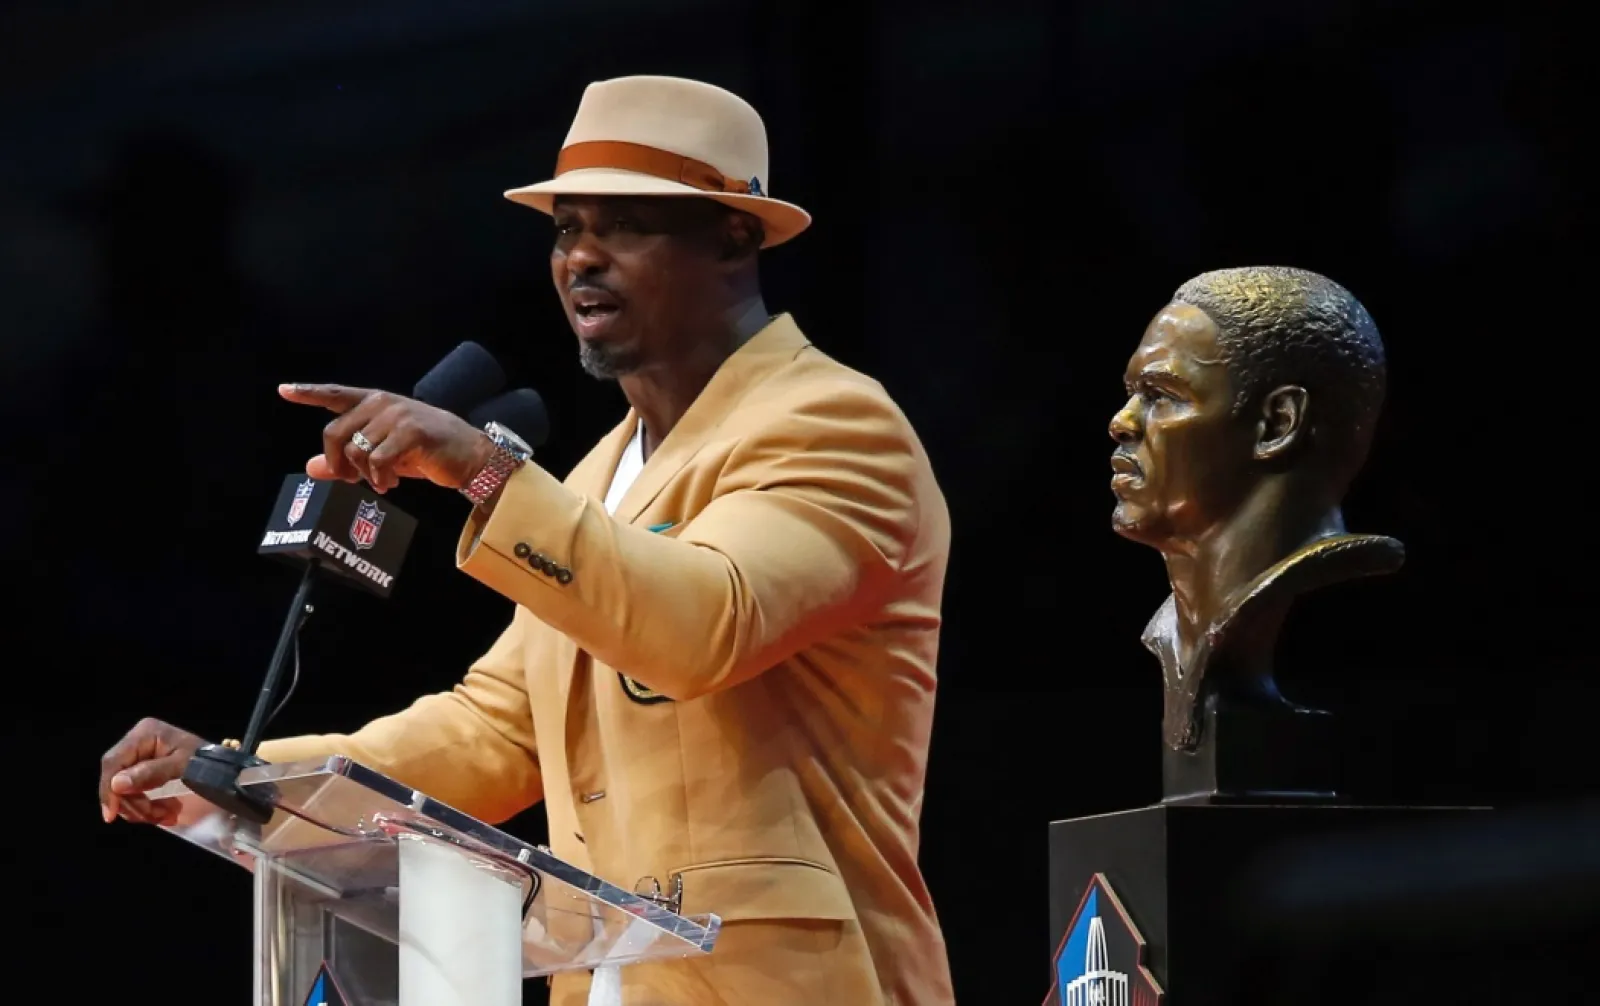 Brian Dawkins with a microphone pointing at another man